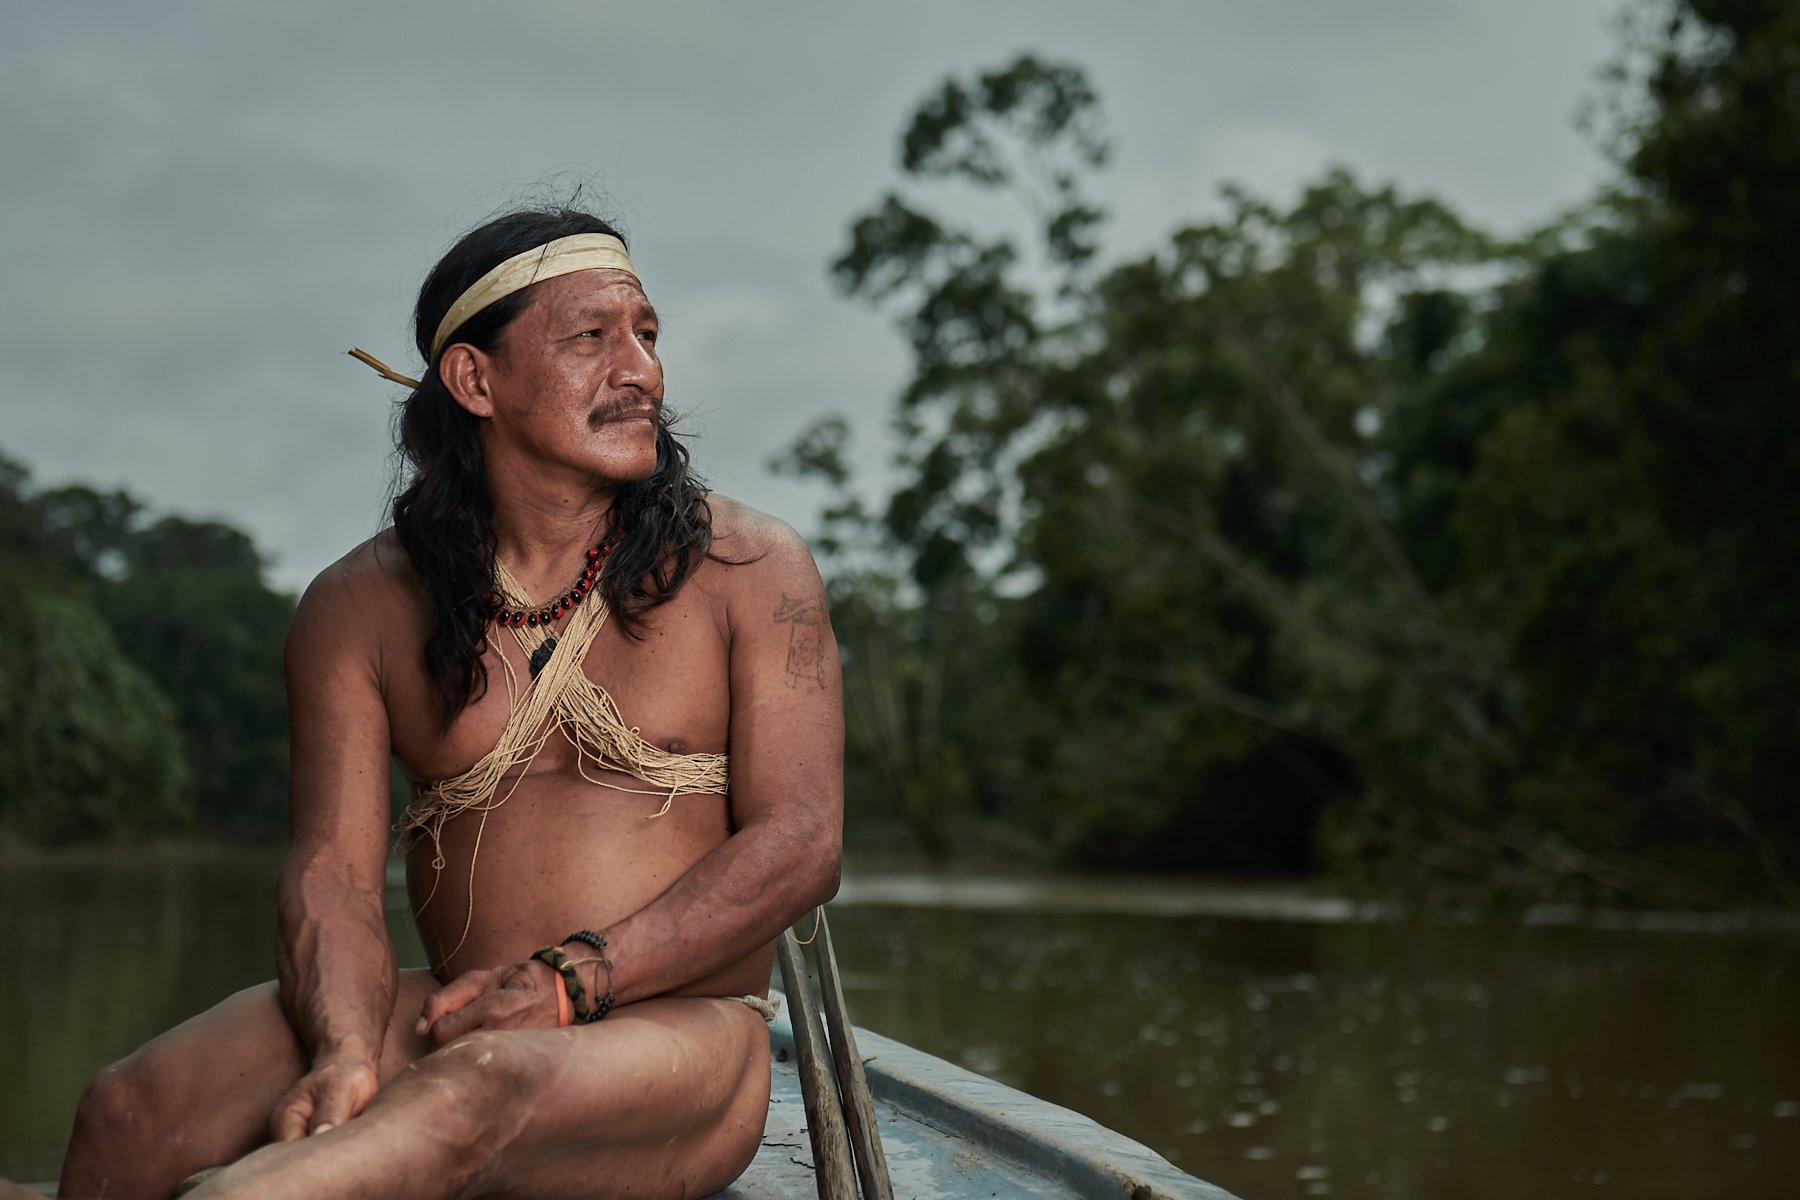 Peinty, the tribe leader and a leader in the Huaorani efforts against the large petroleum companies invading their territories